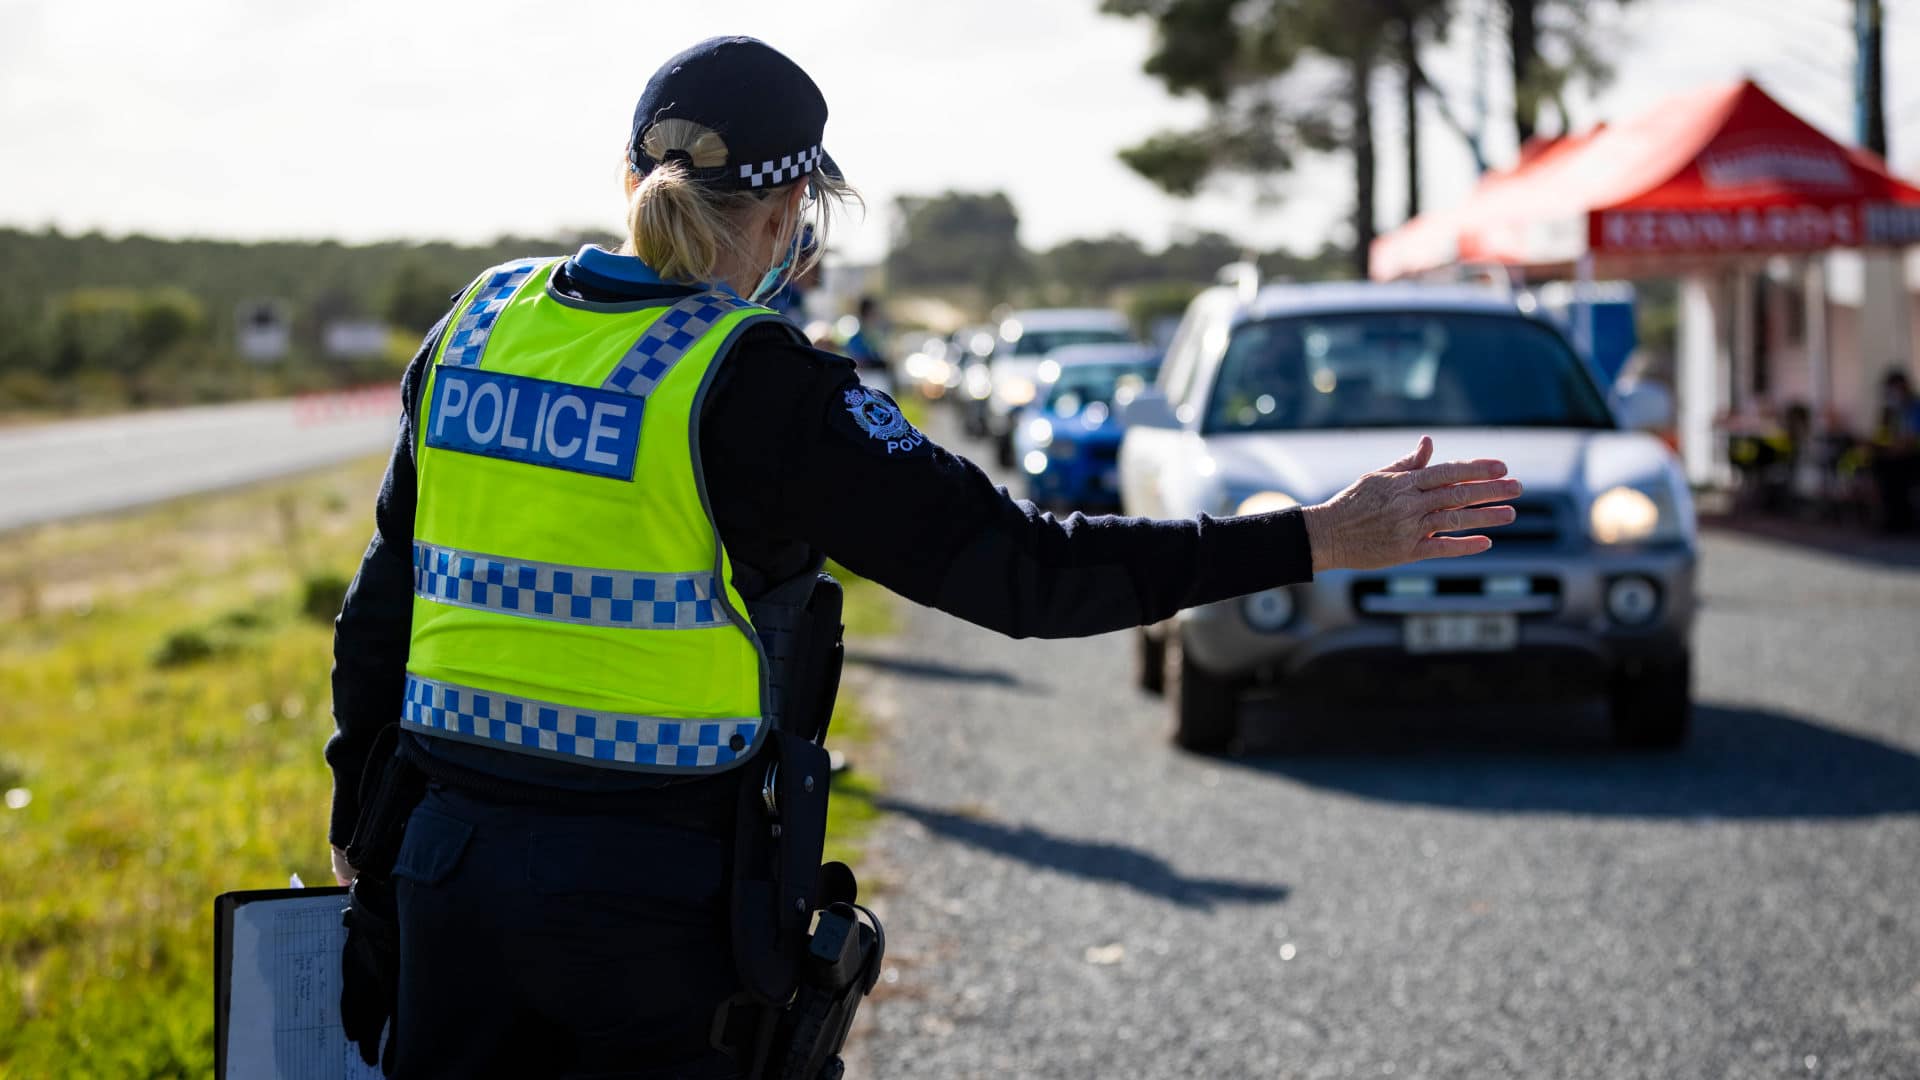 A member of the police force inspects cars at a border check point north of Perth, Western Australia on June 29, 2021. Due to the state's strict lockdowns and border closures, residents now go about their daily lives without the threat of Covid-19.